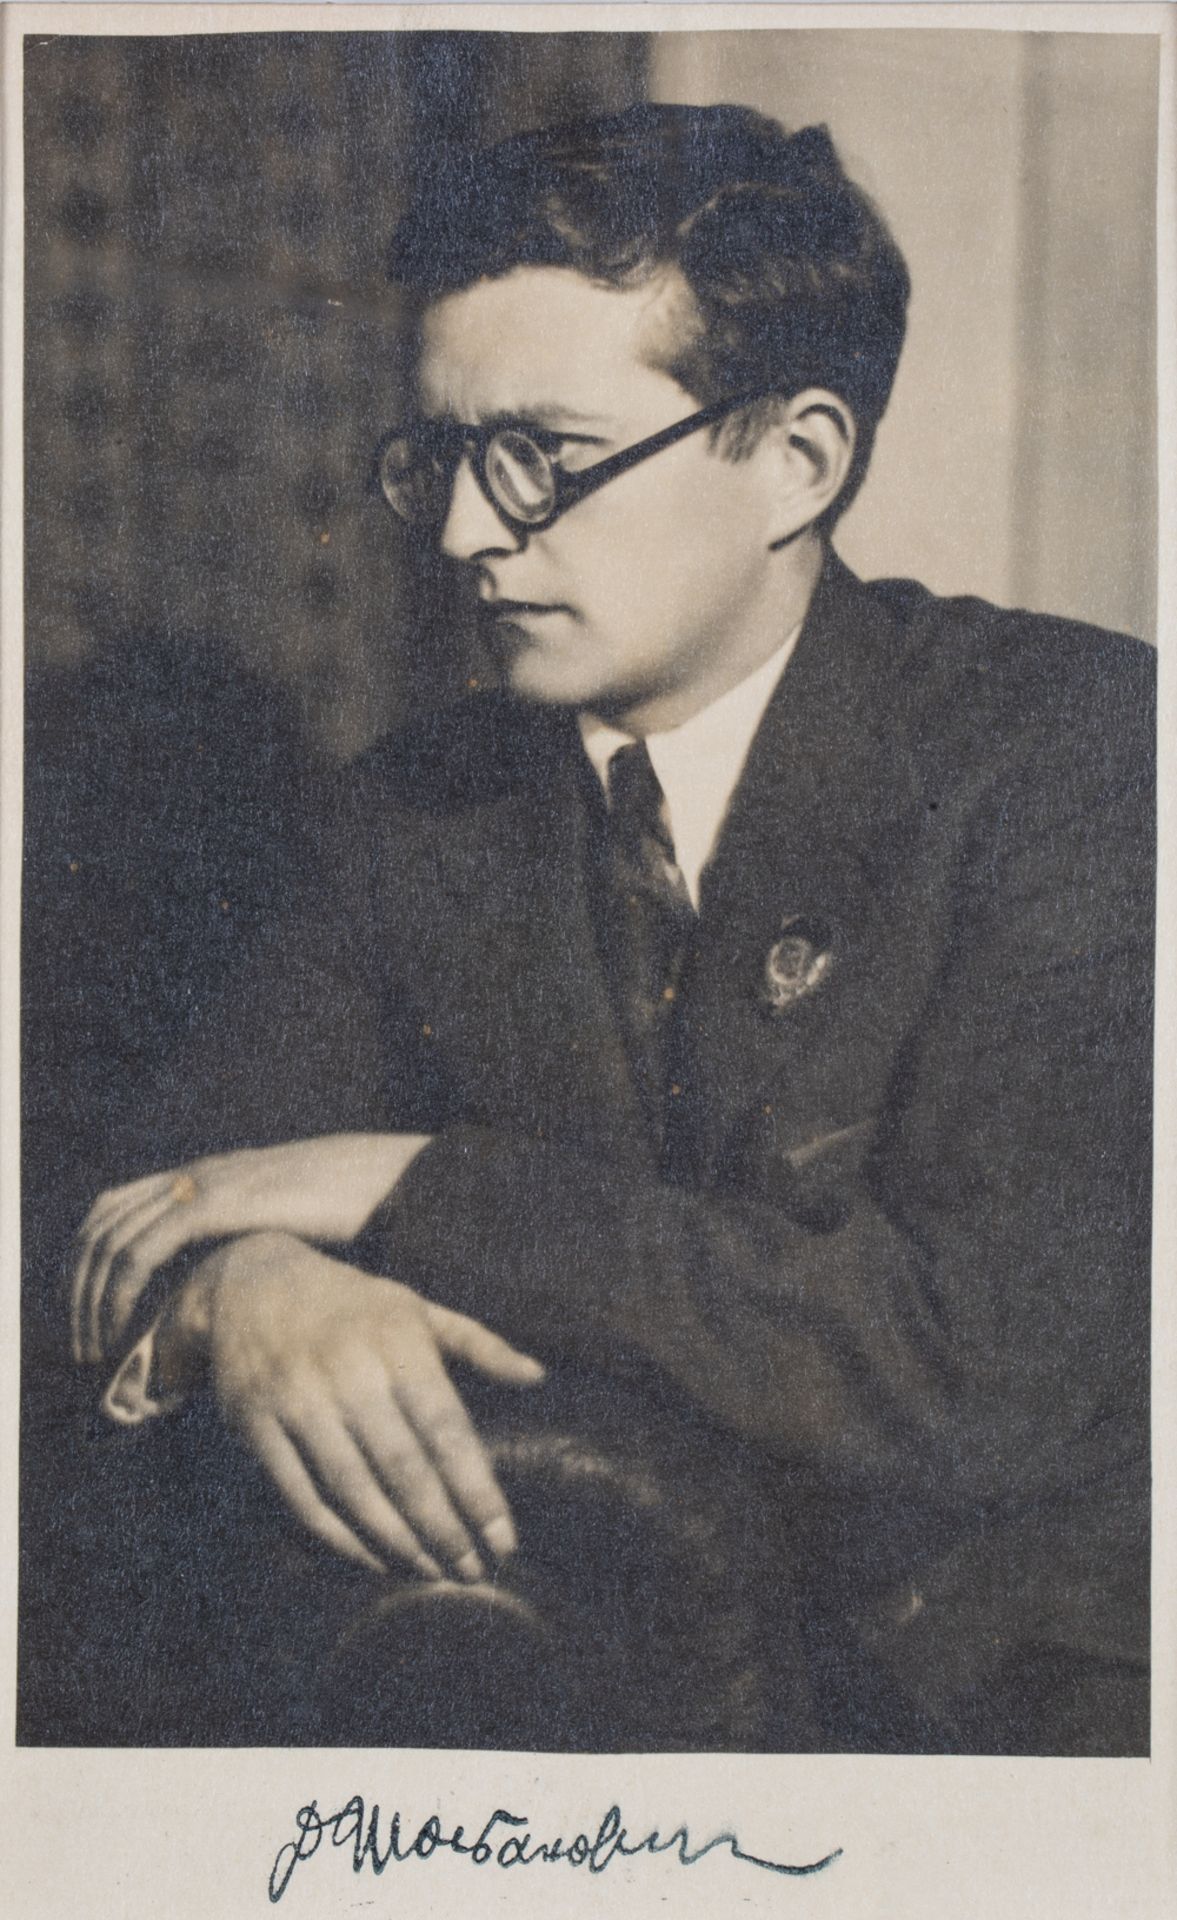 A VINTAGE SIGNED PHOTOGRAPH OF DMITRI SHOSTAKOVICH - Image 2 of 2